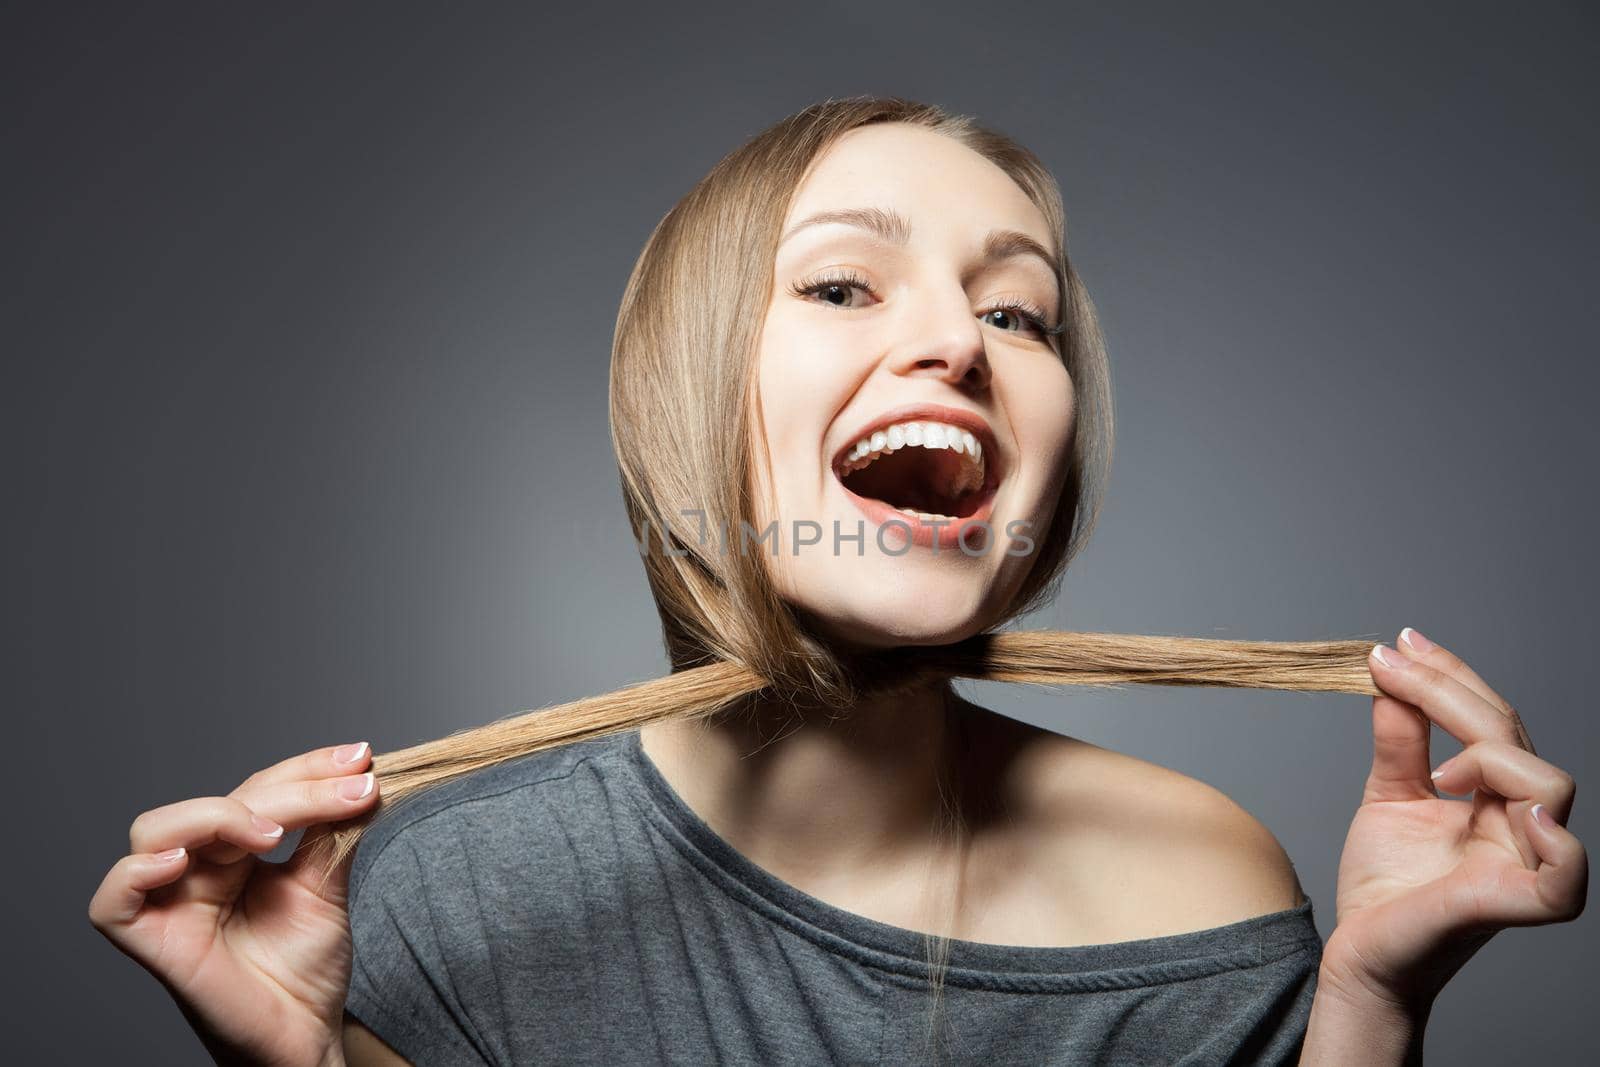 Smiling woman with mouth opened holding hair around face. Horizontal studio shot